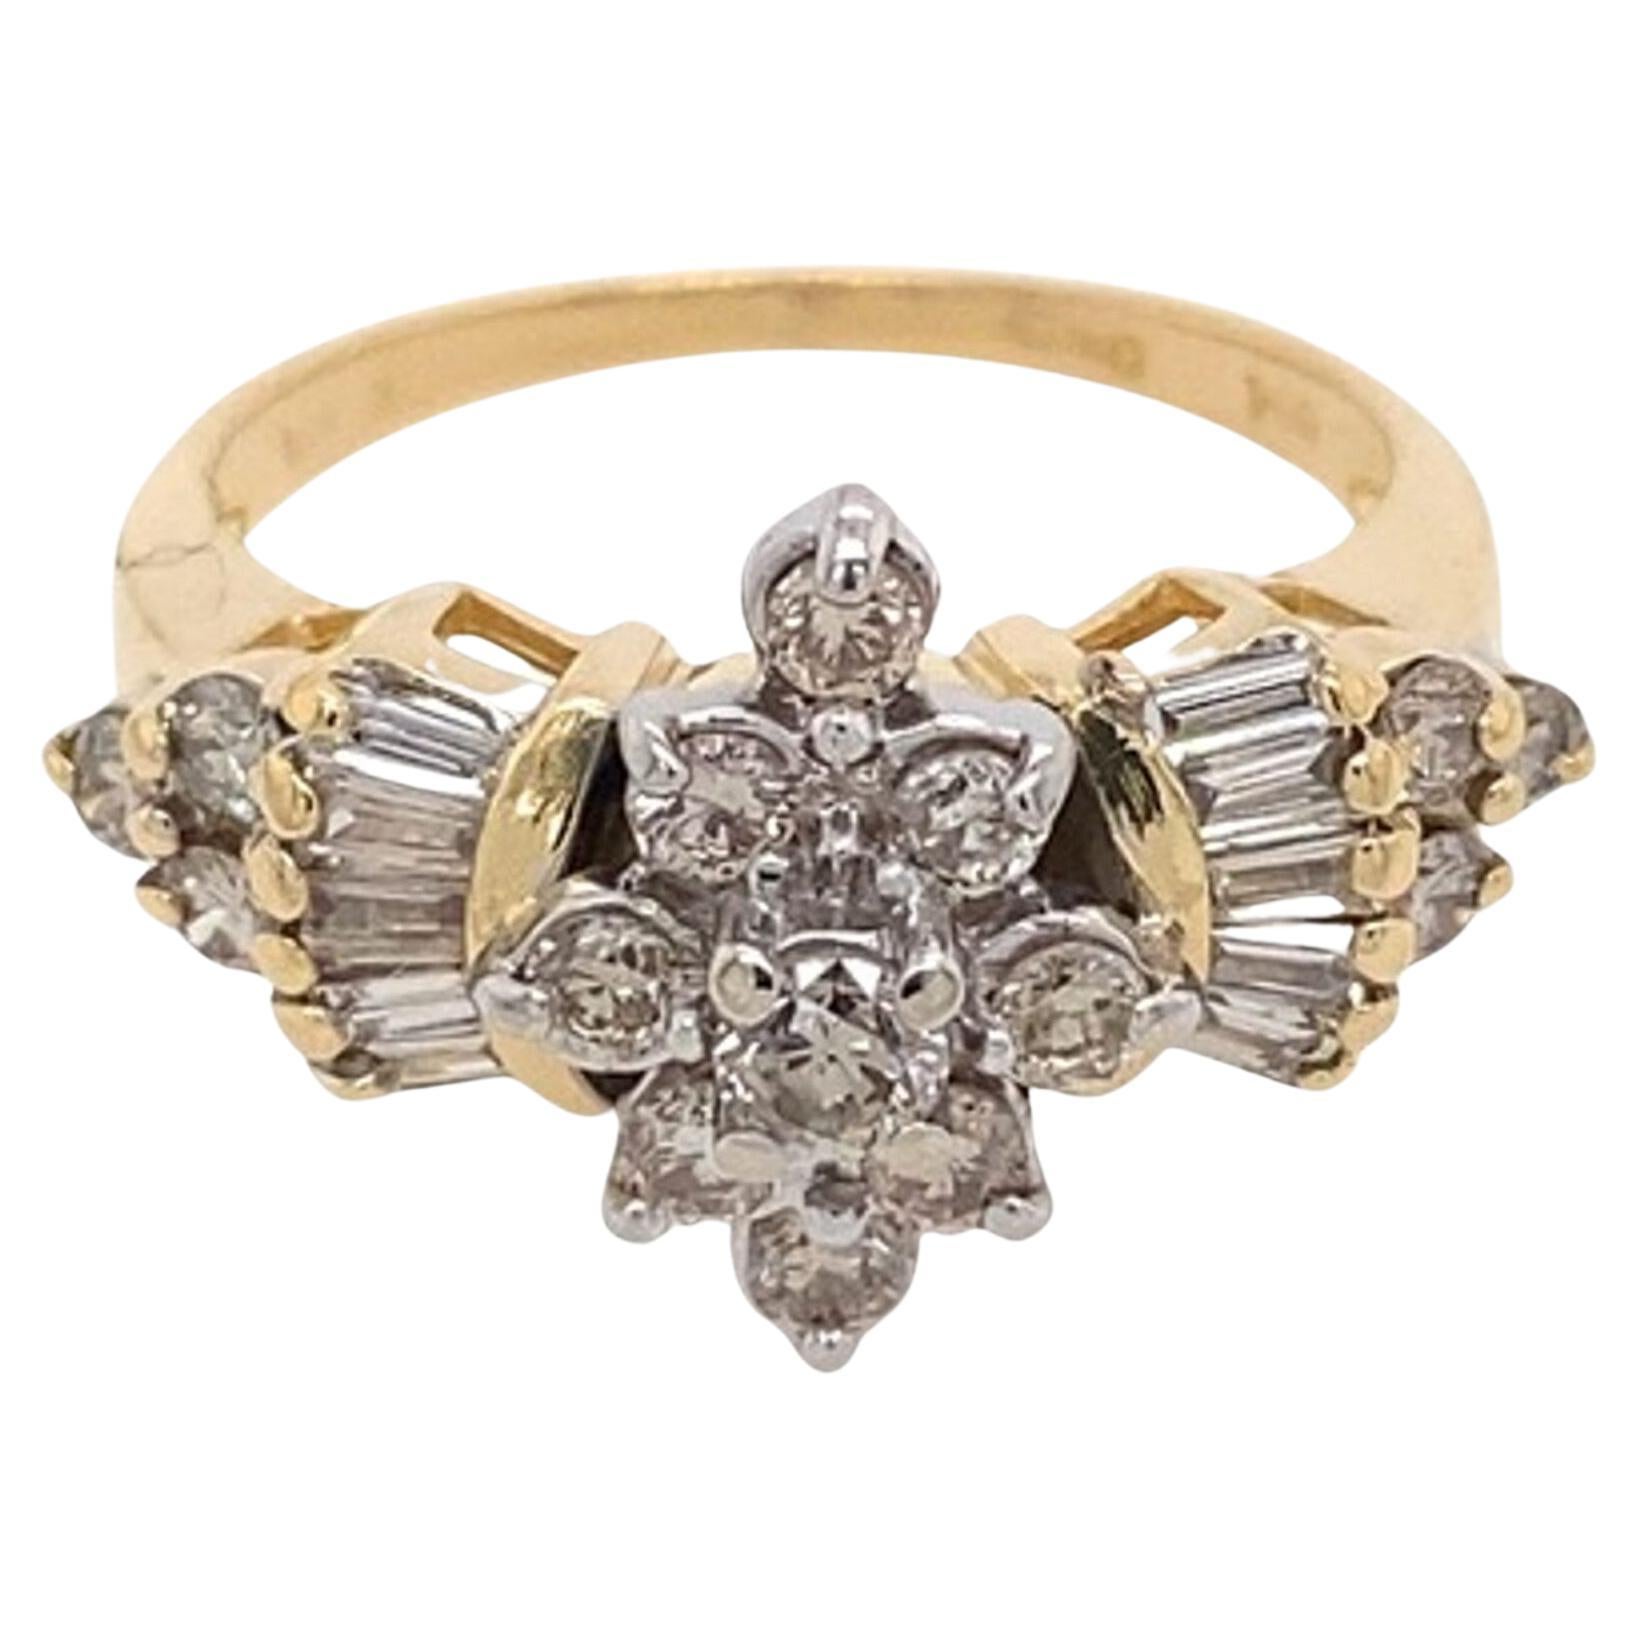 18ct Yellow & White Gold Ring with 1.0ct of Natural Baguette + Round Diamonds